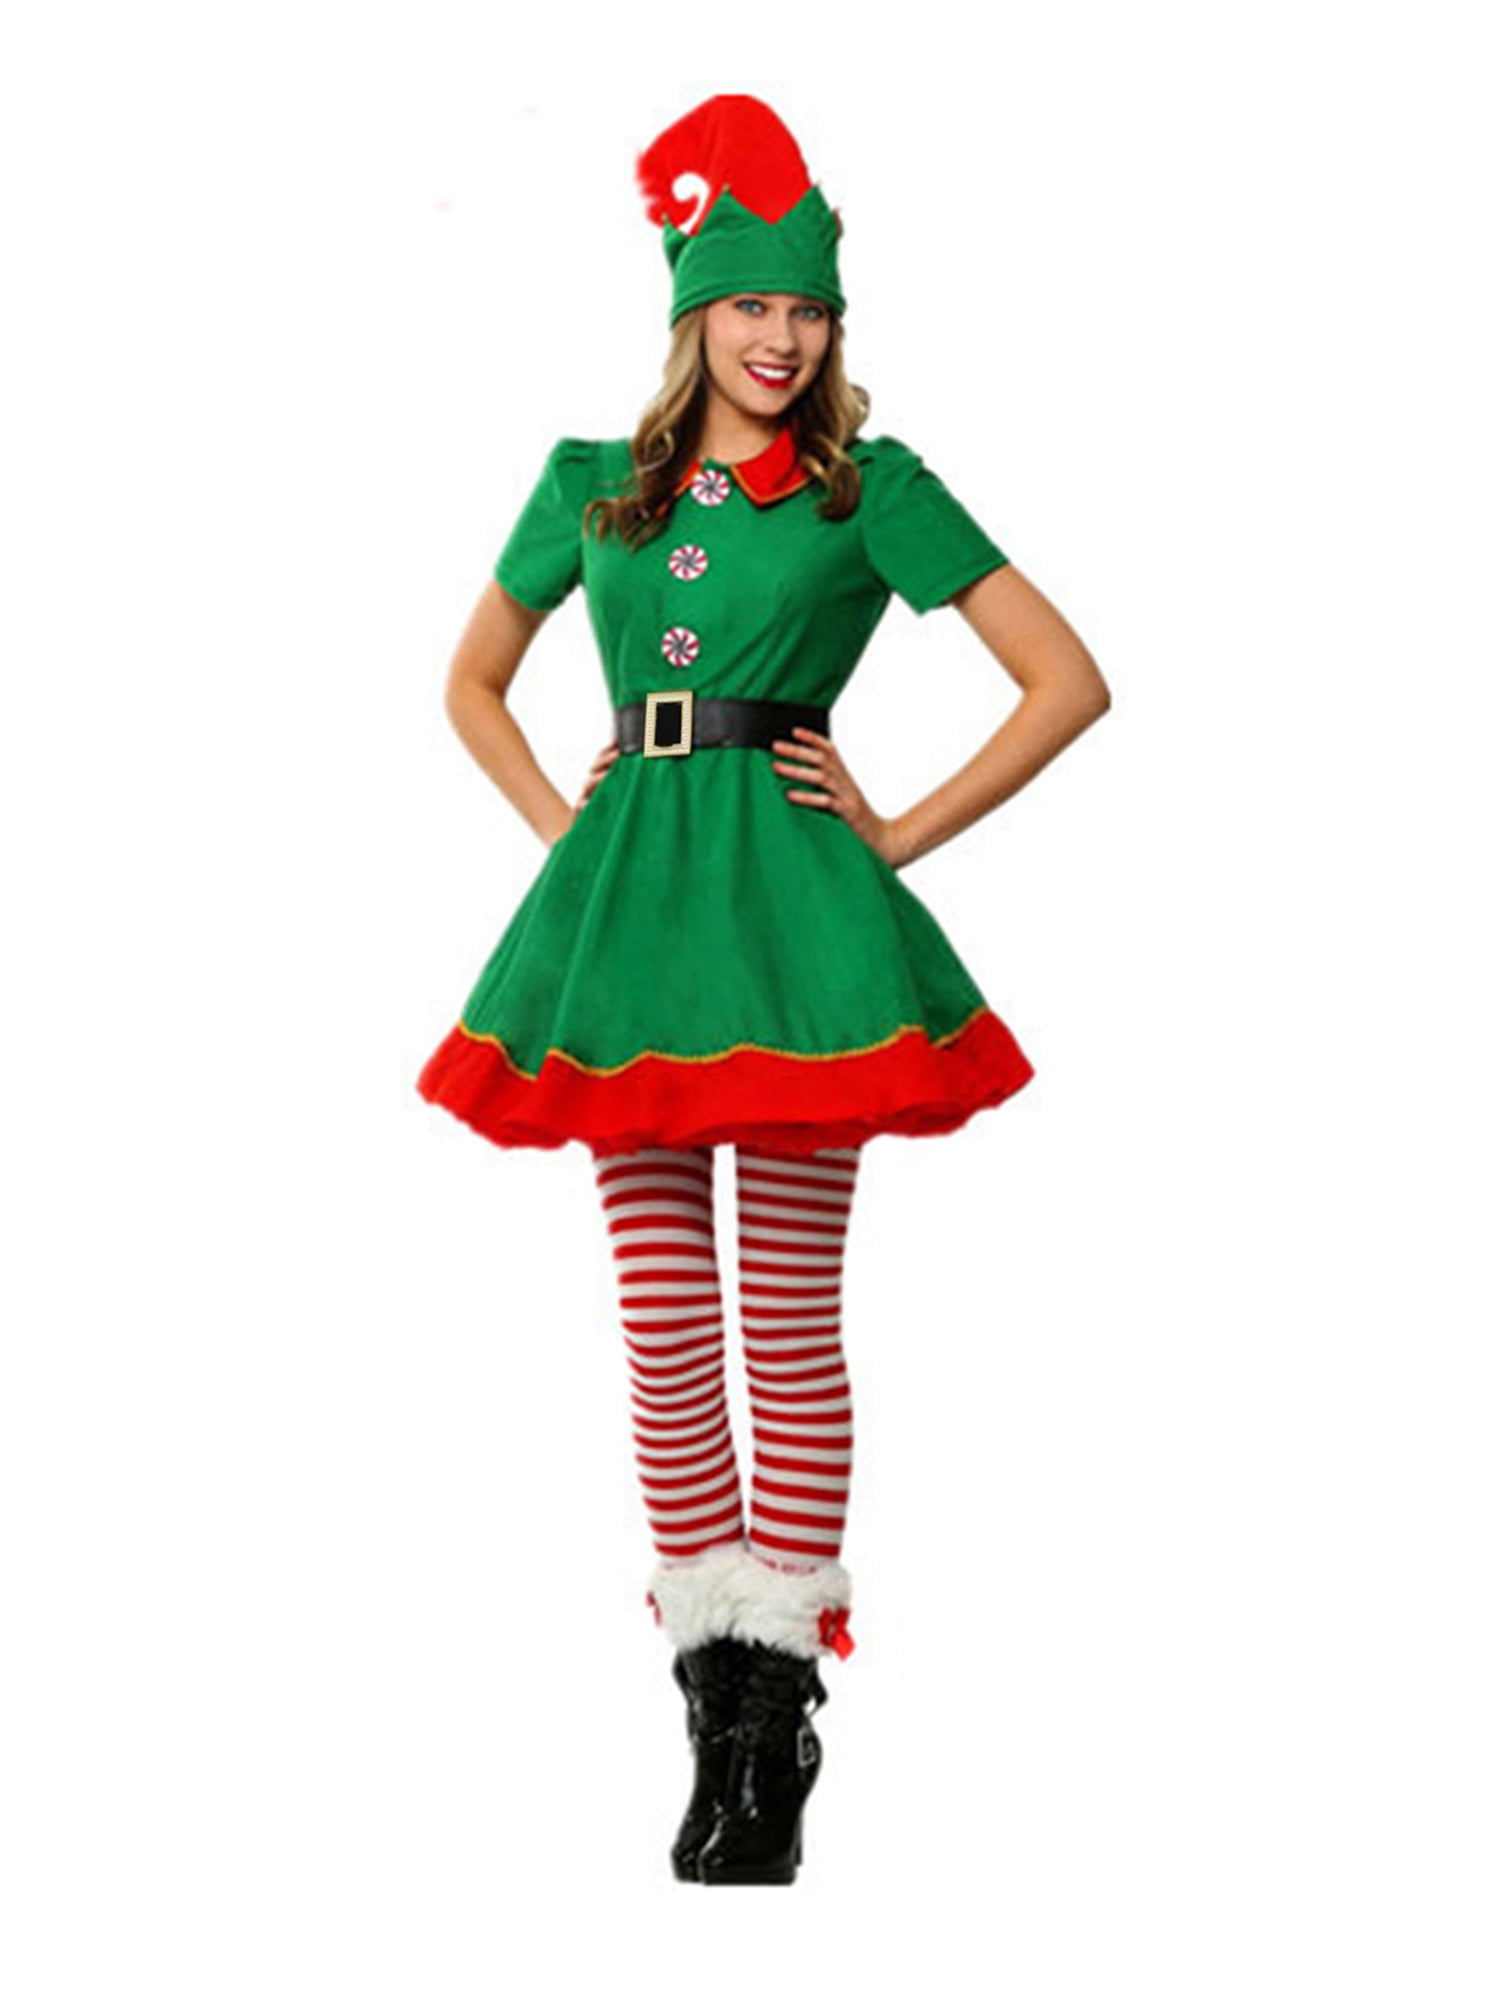 Infant Elf Outfit Disfraz Bebe Navidad, Ropa Navidad Bebe, Disfraz De  Duende Navideño | Infant Christmas Elf Costume, Thickening Costume For Baby  